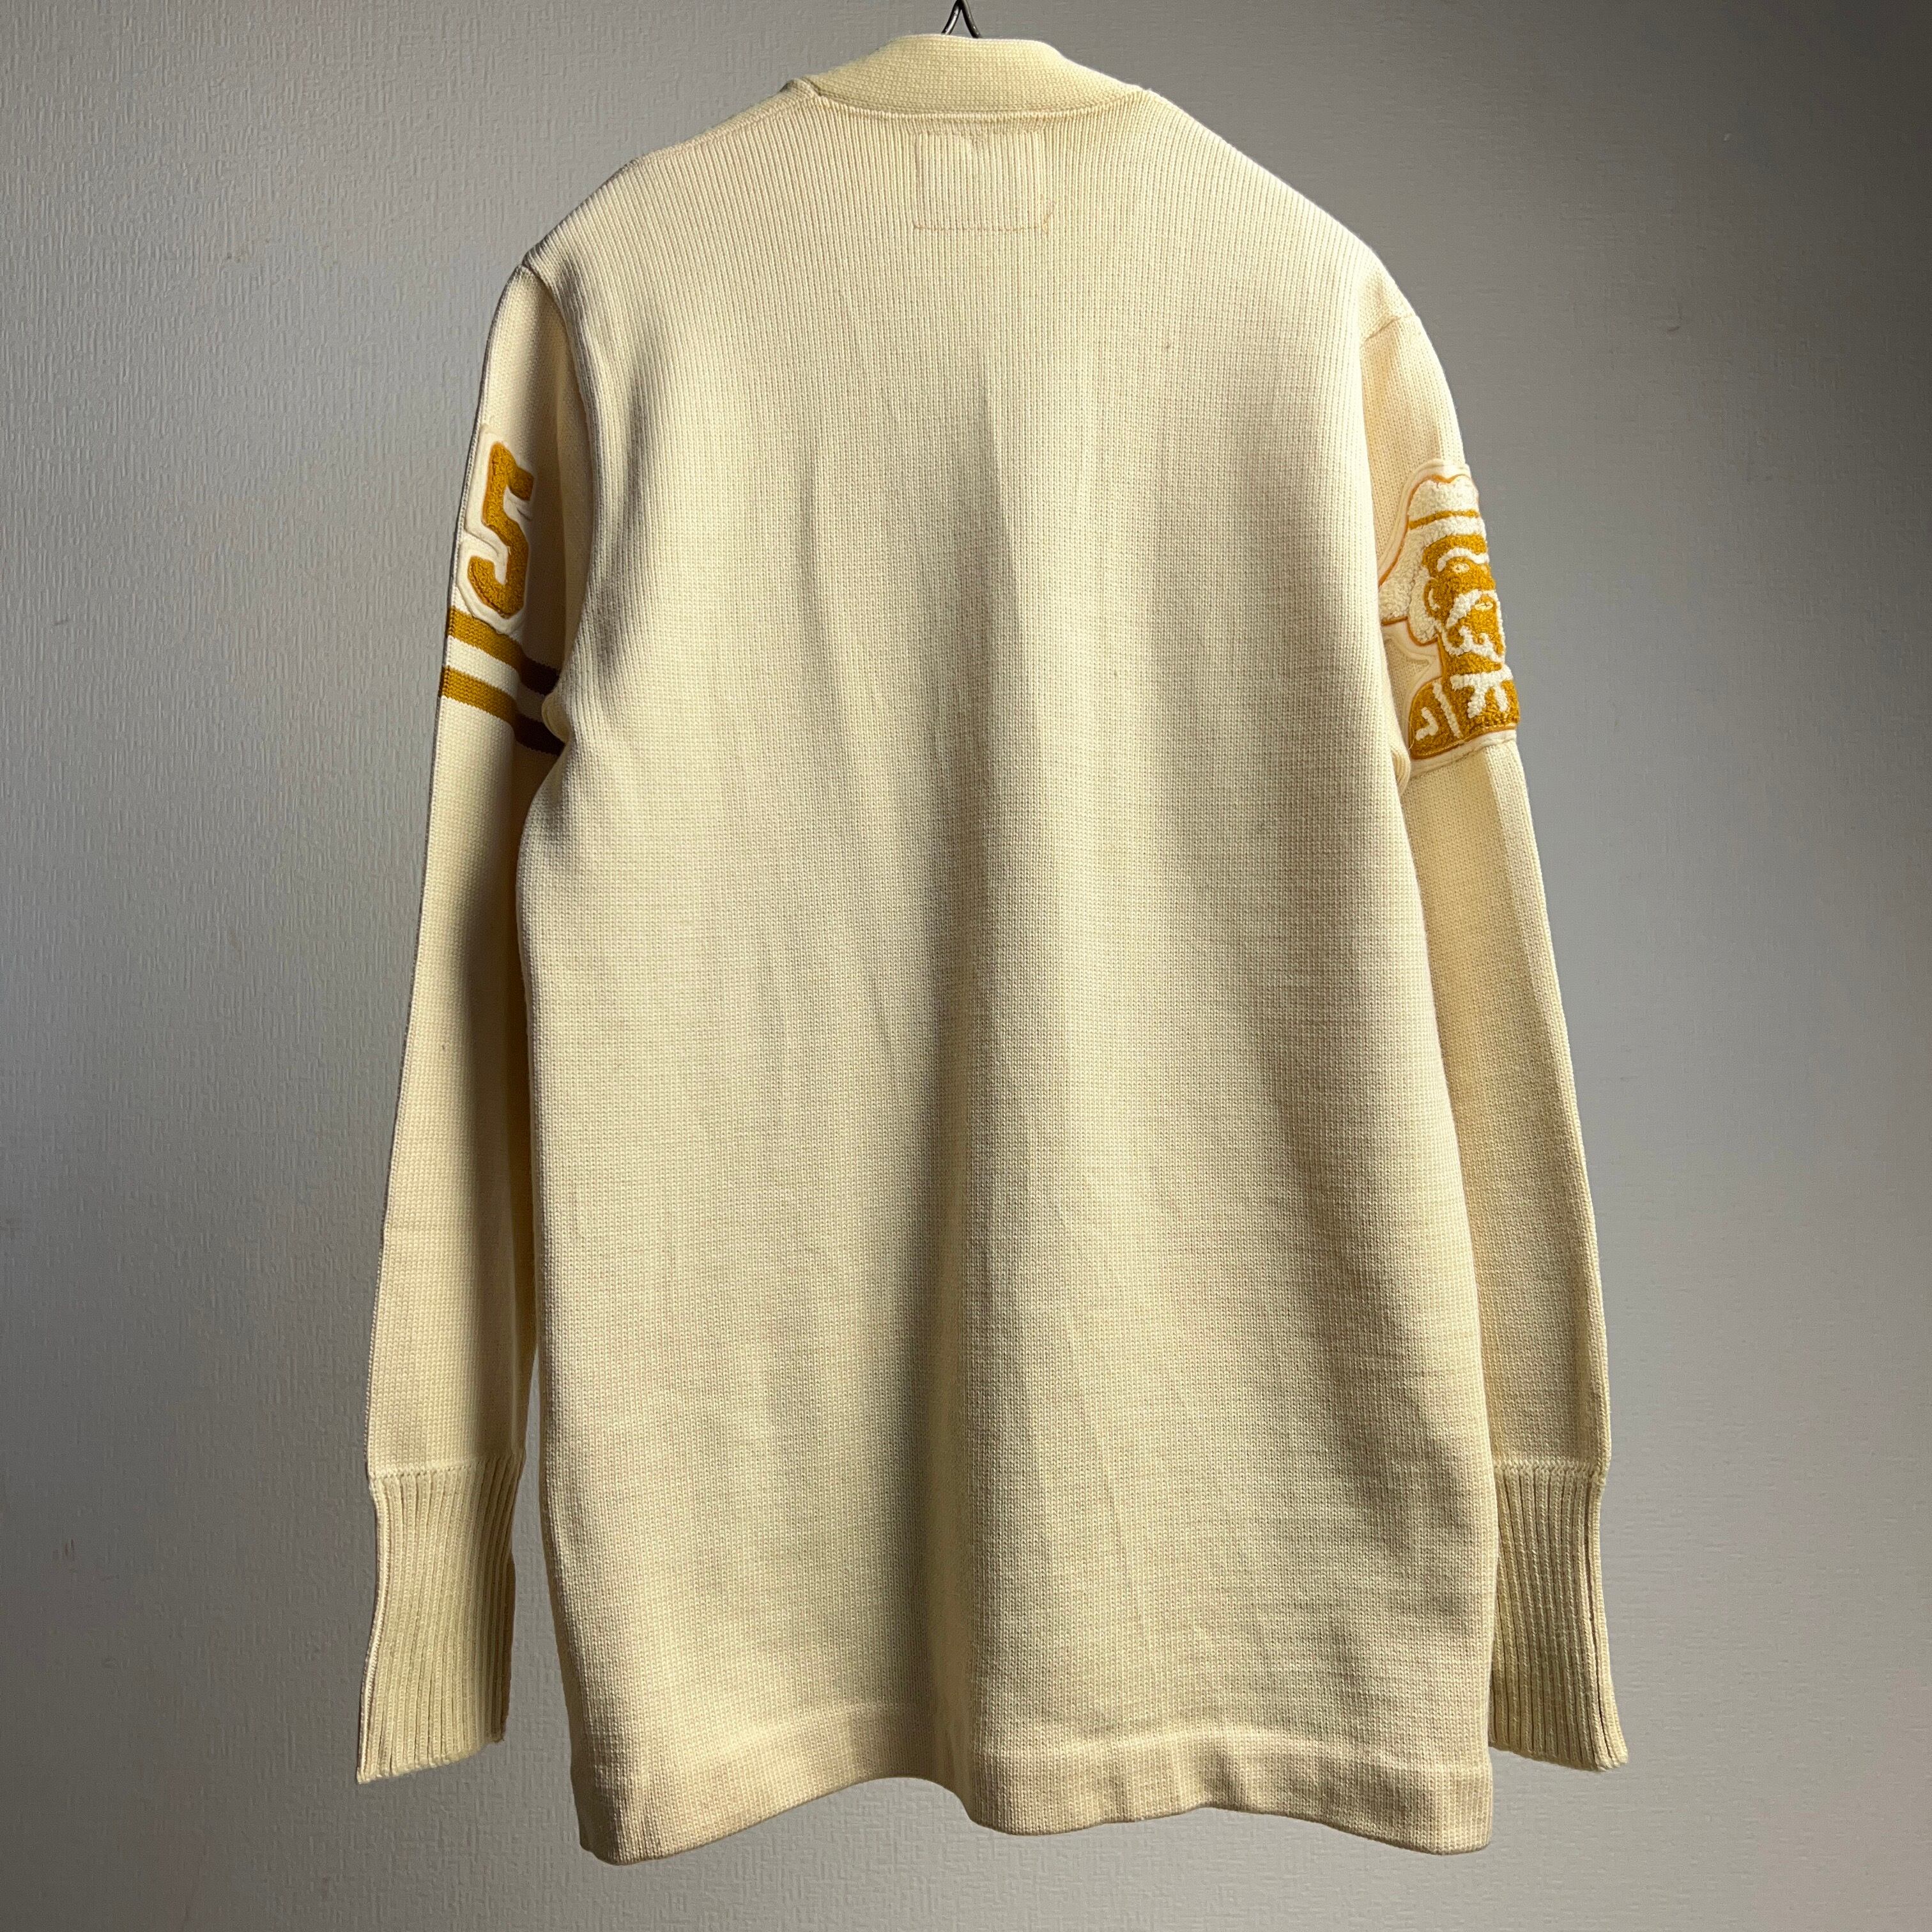 50's~60's “Whiting” Lettered Cardigan 50年代 60年代 レタード ...